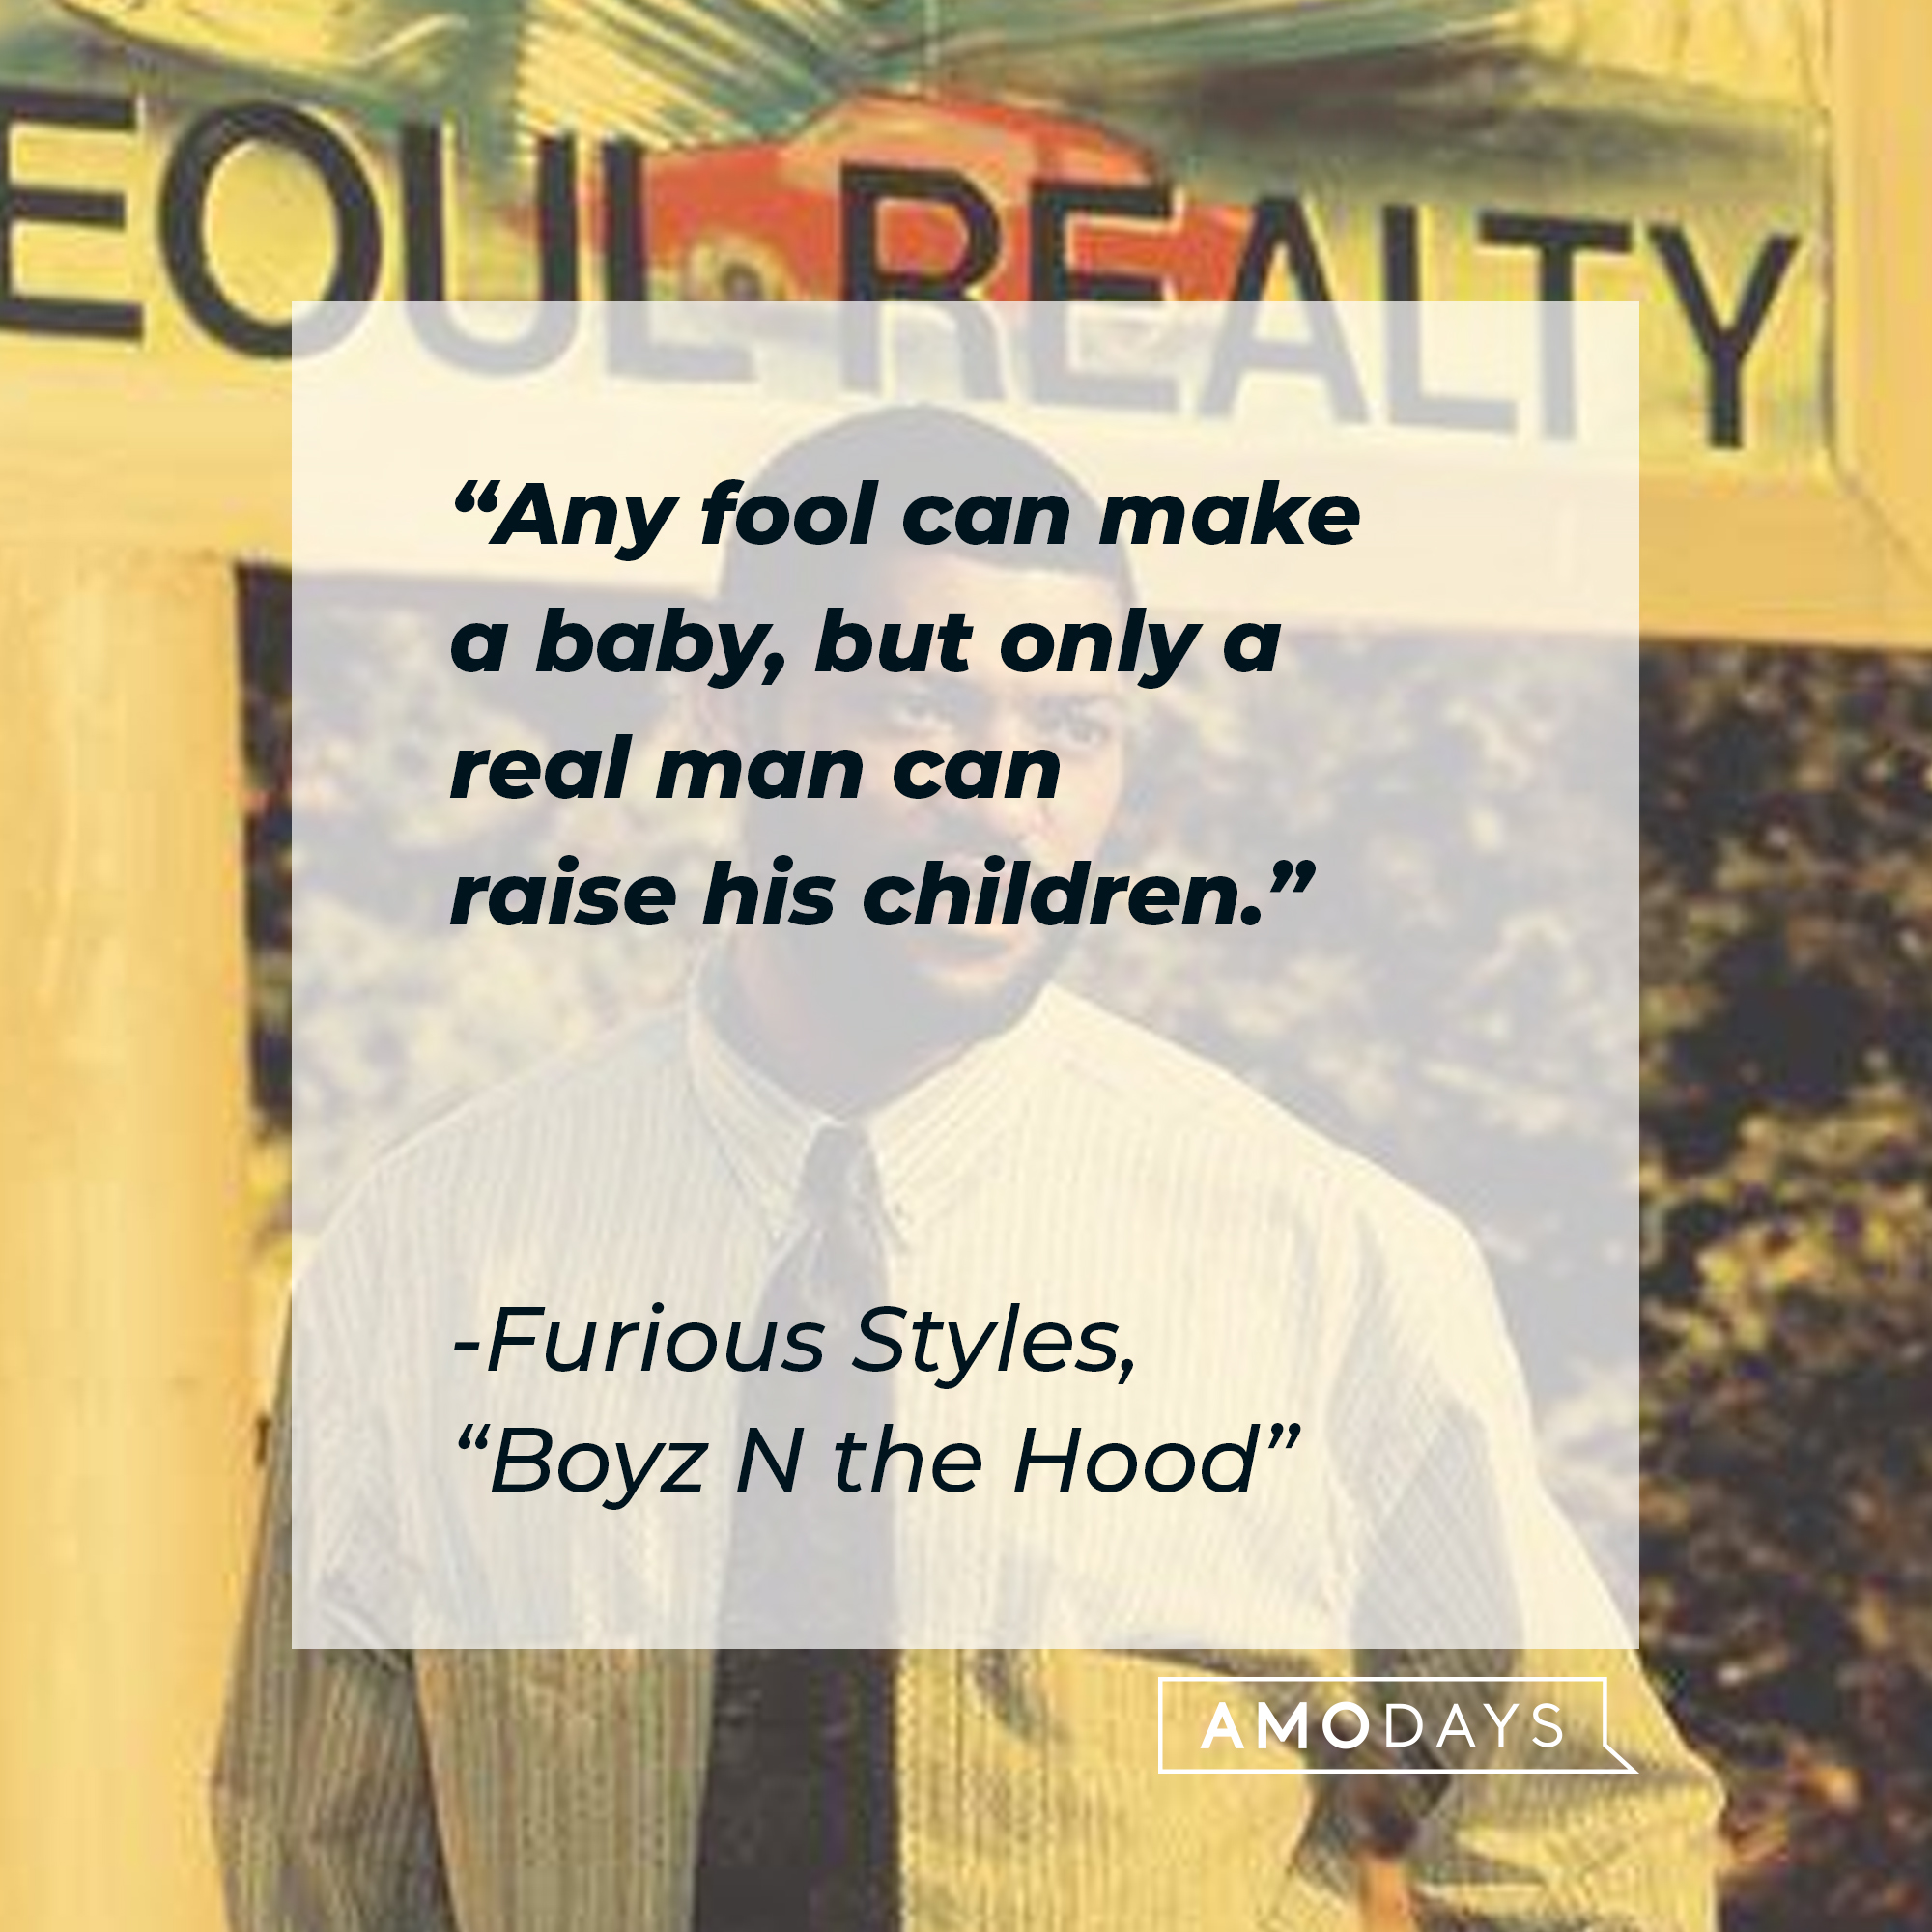 Furious Style's quote in "Boyz N the Hood:" "Any fool can make a baby, but only a real man can raise his children." | Source: Facebook.com/BoyzNtheHood